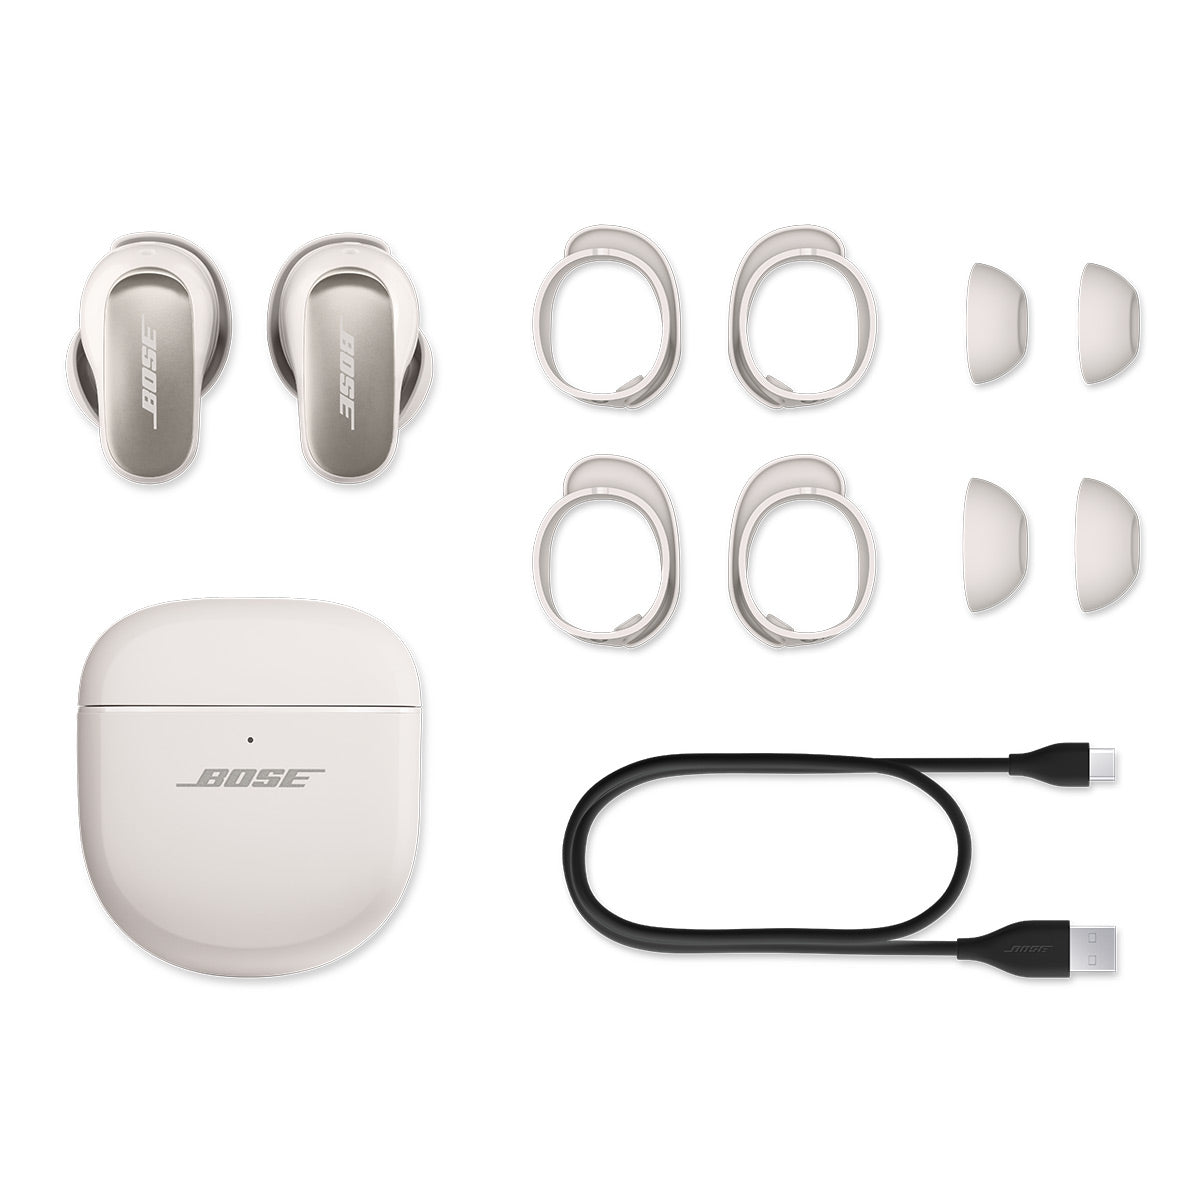 Bose QuietComfort Ultra Wireless Noise Cancelling Earbuds (White)